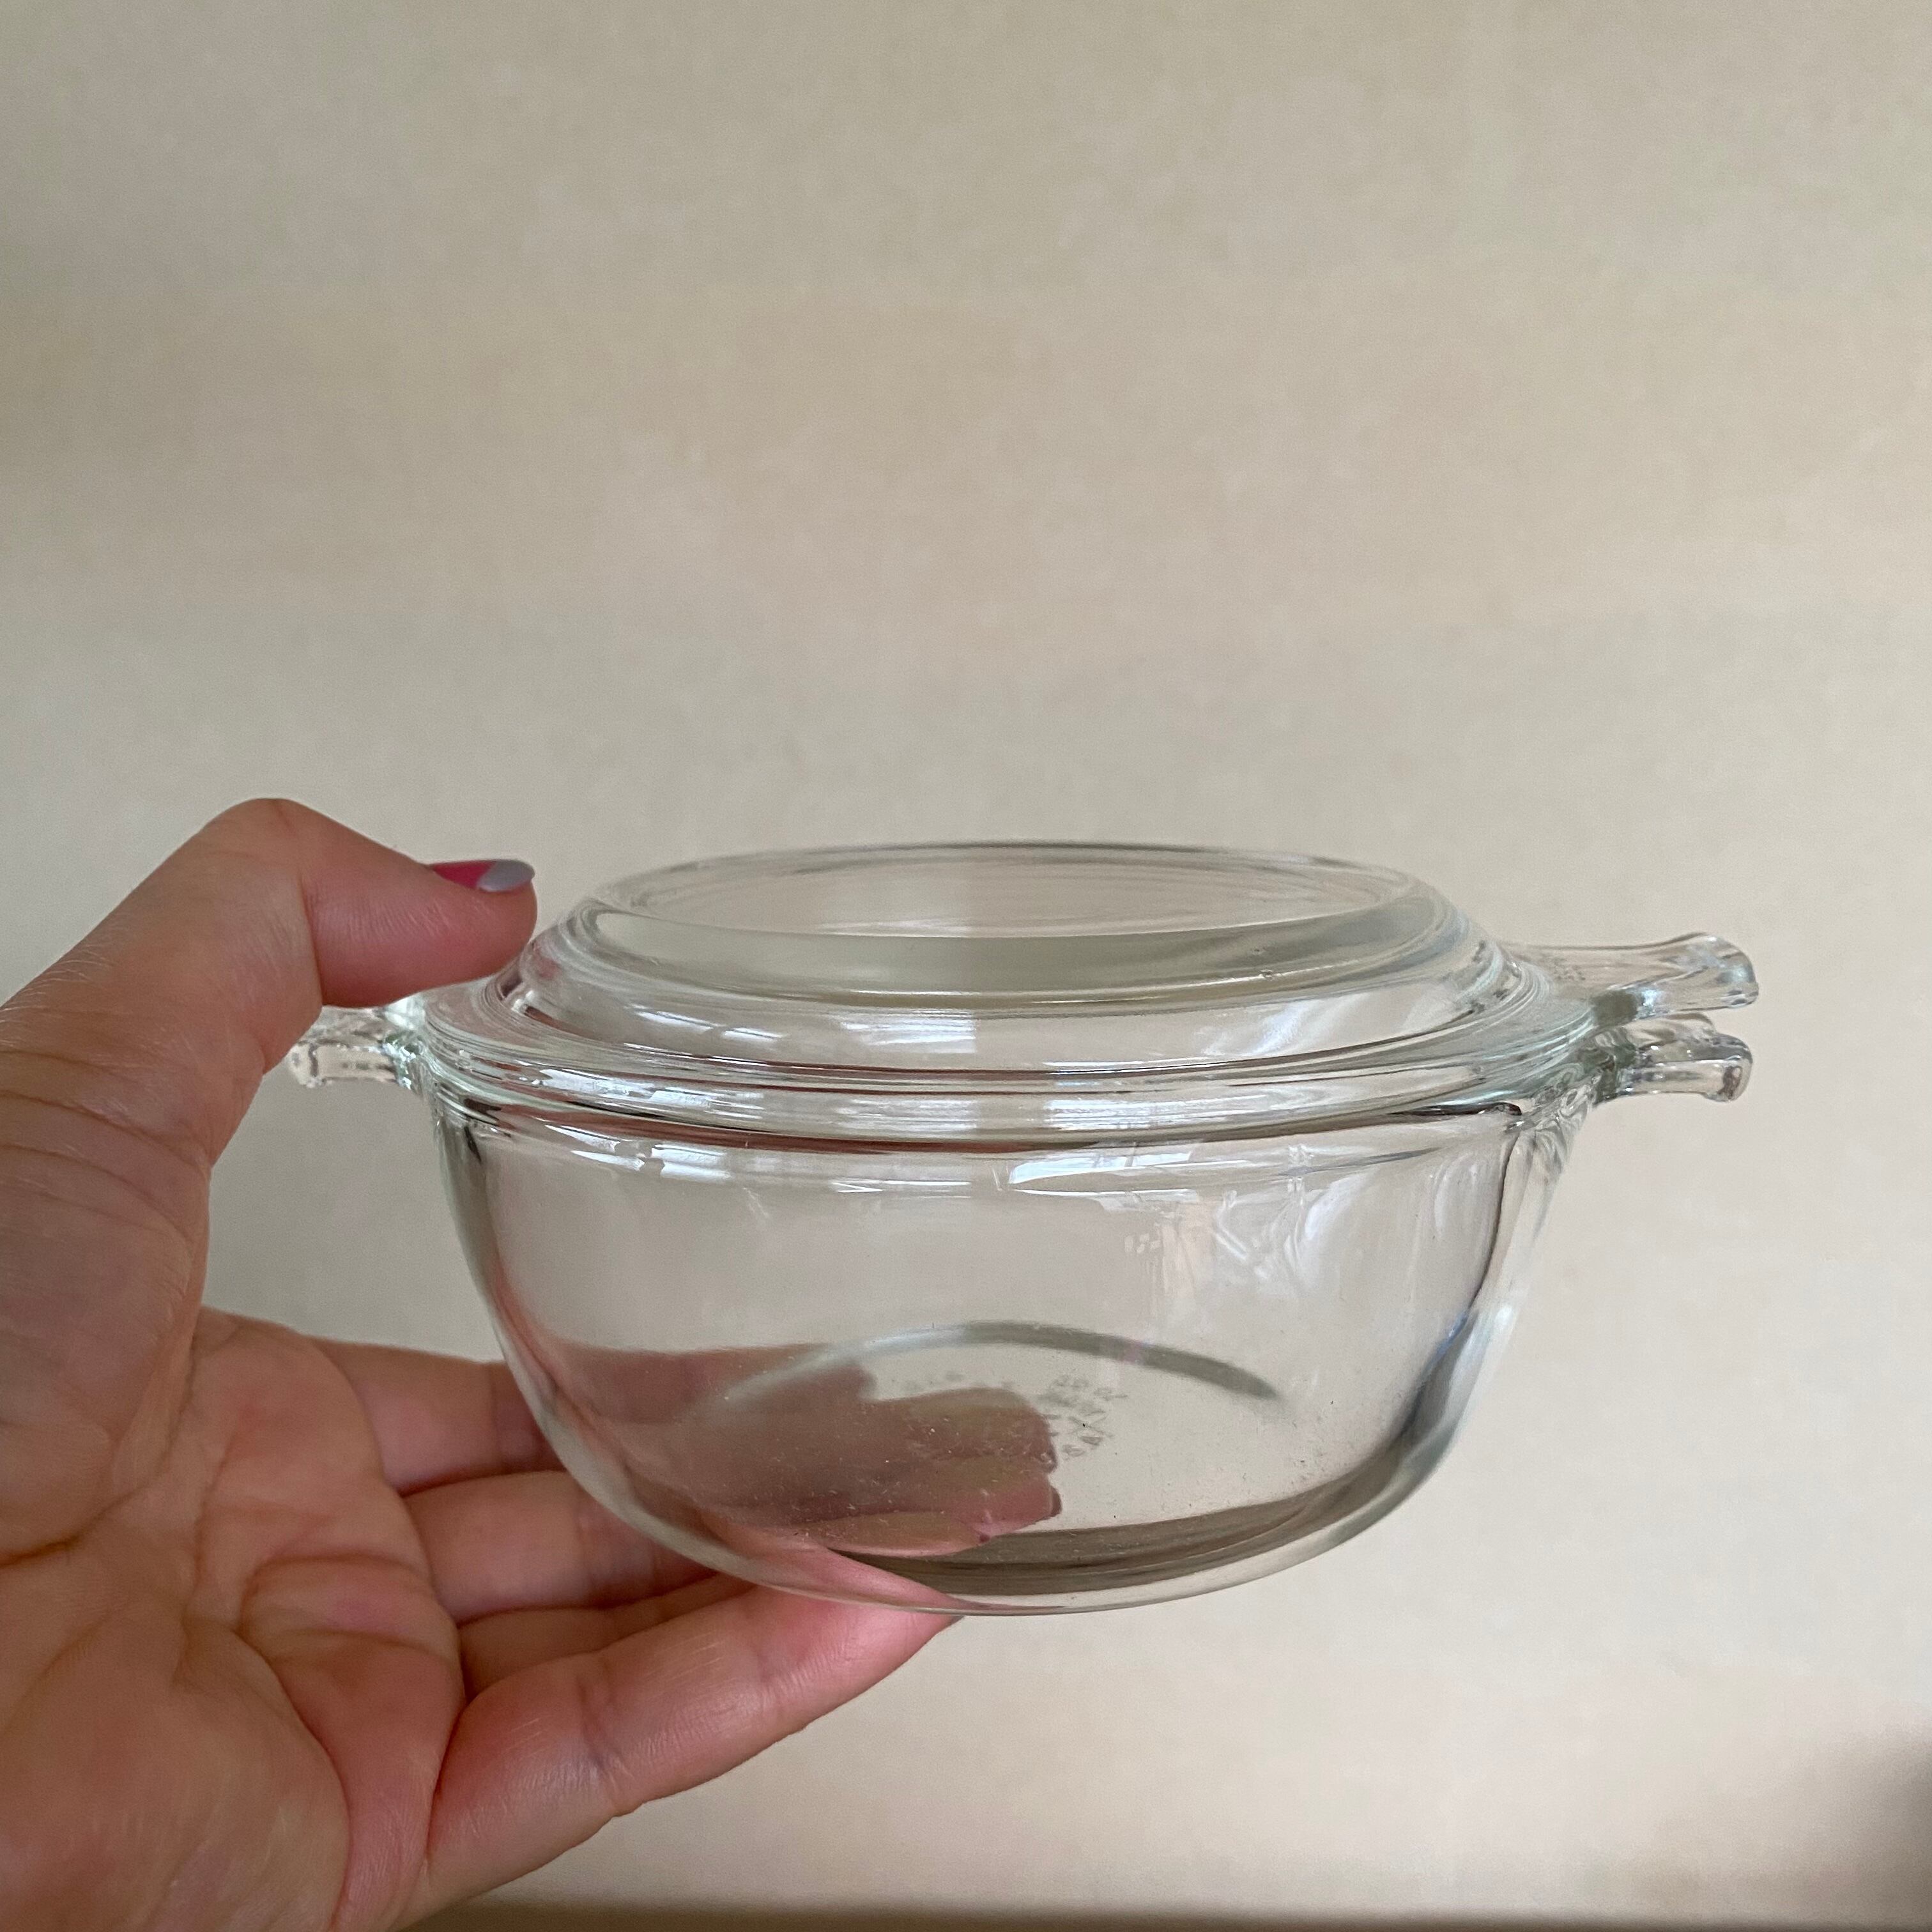 pyrex made in usa 耐熱ガラスキャセロール小 【1068】 | fave